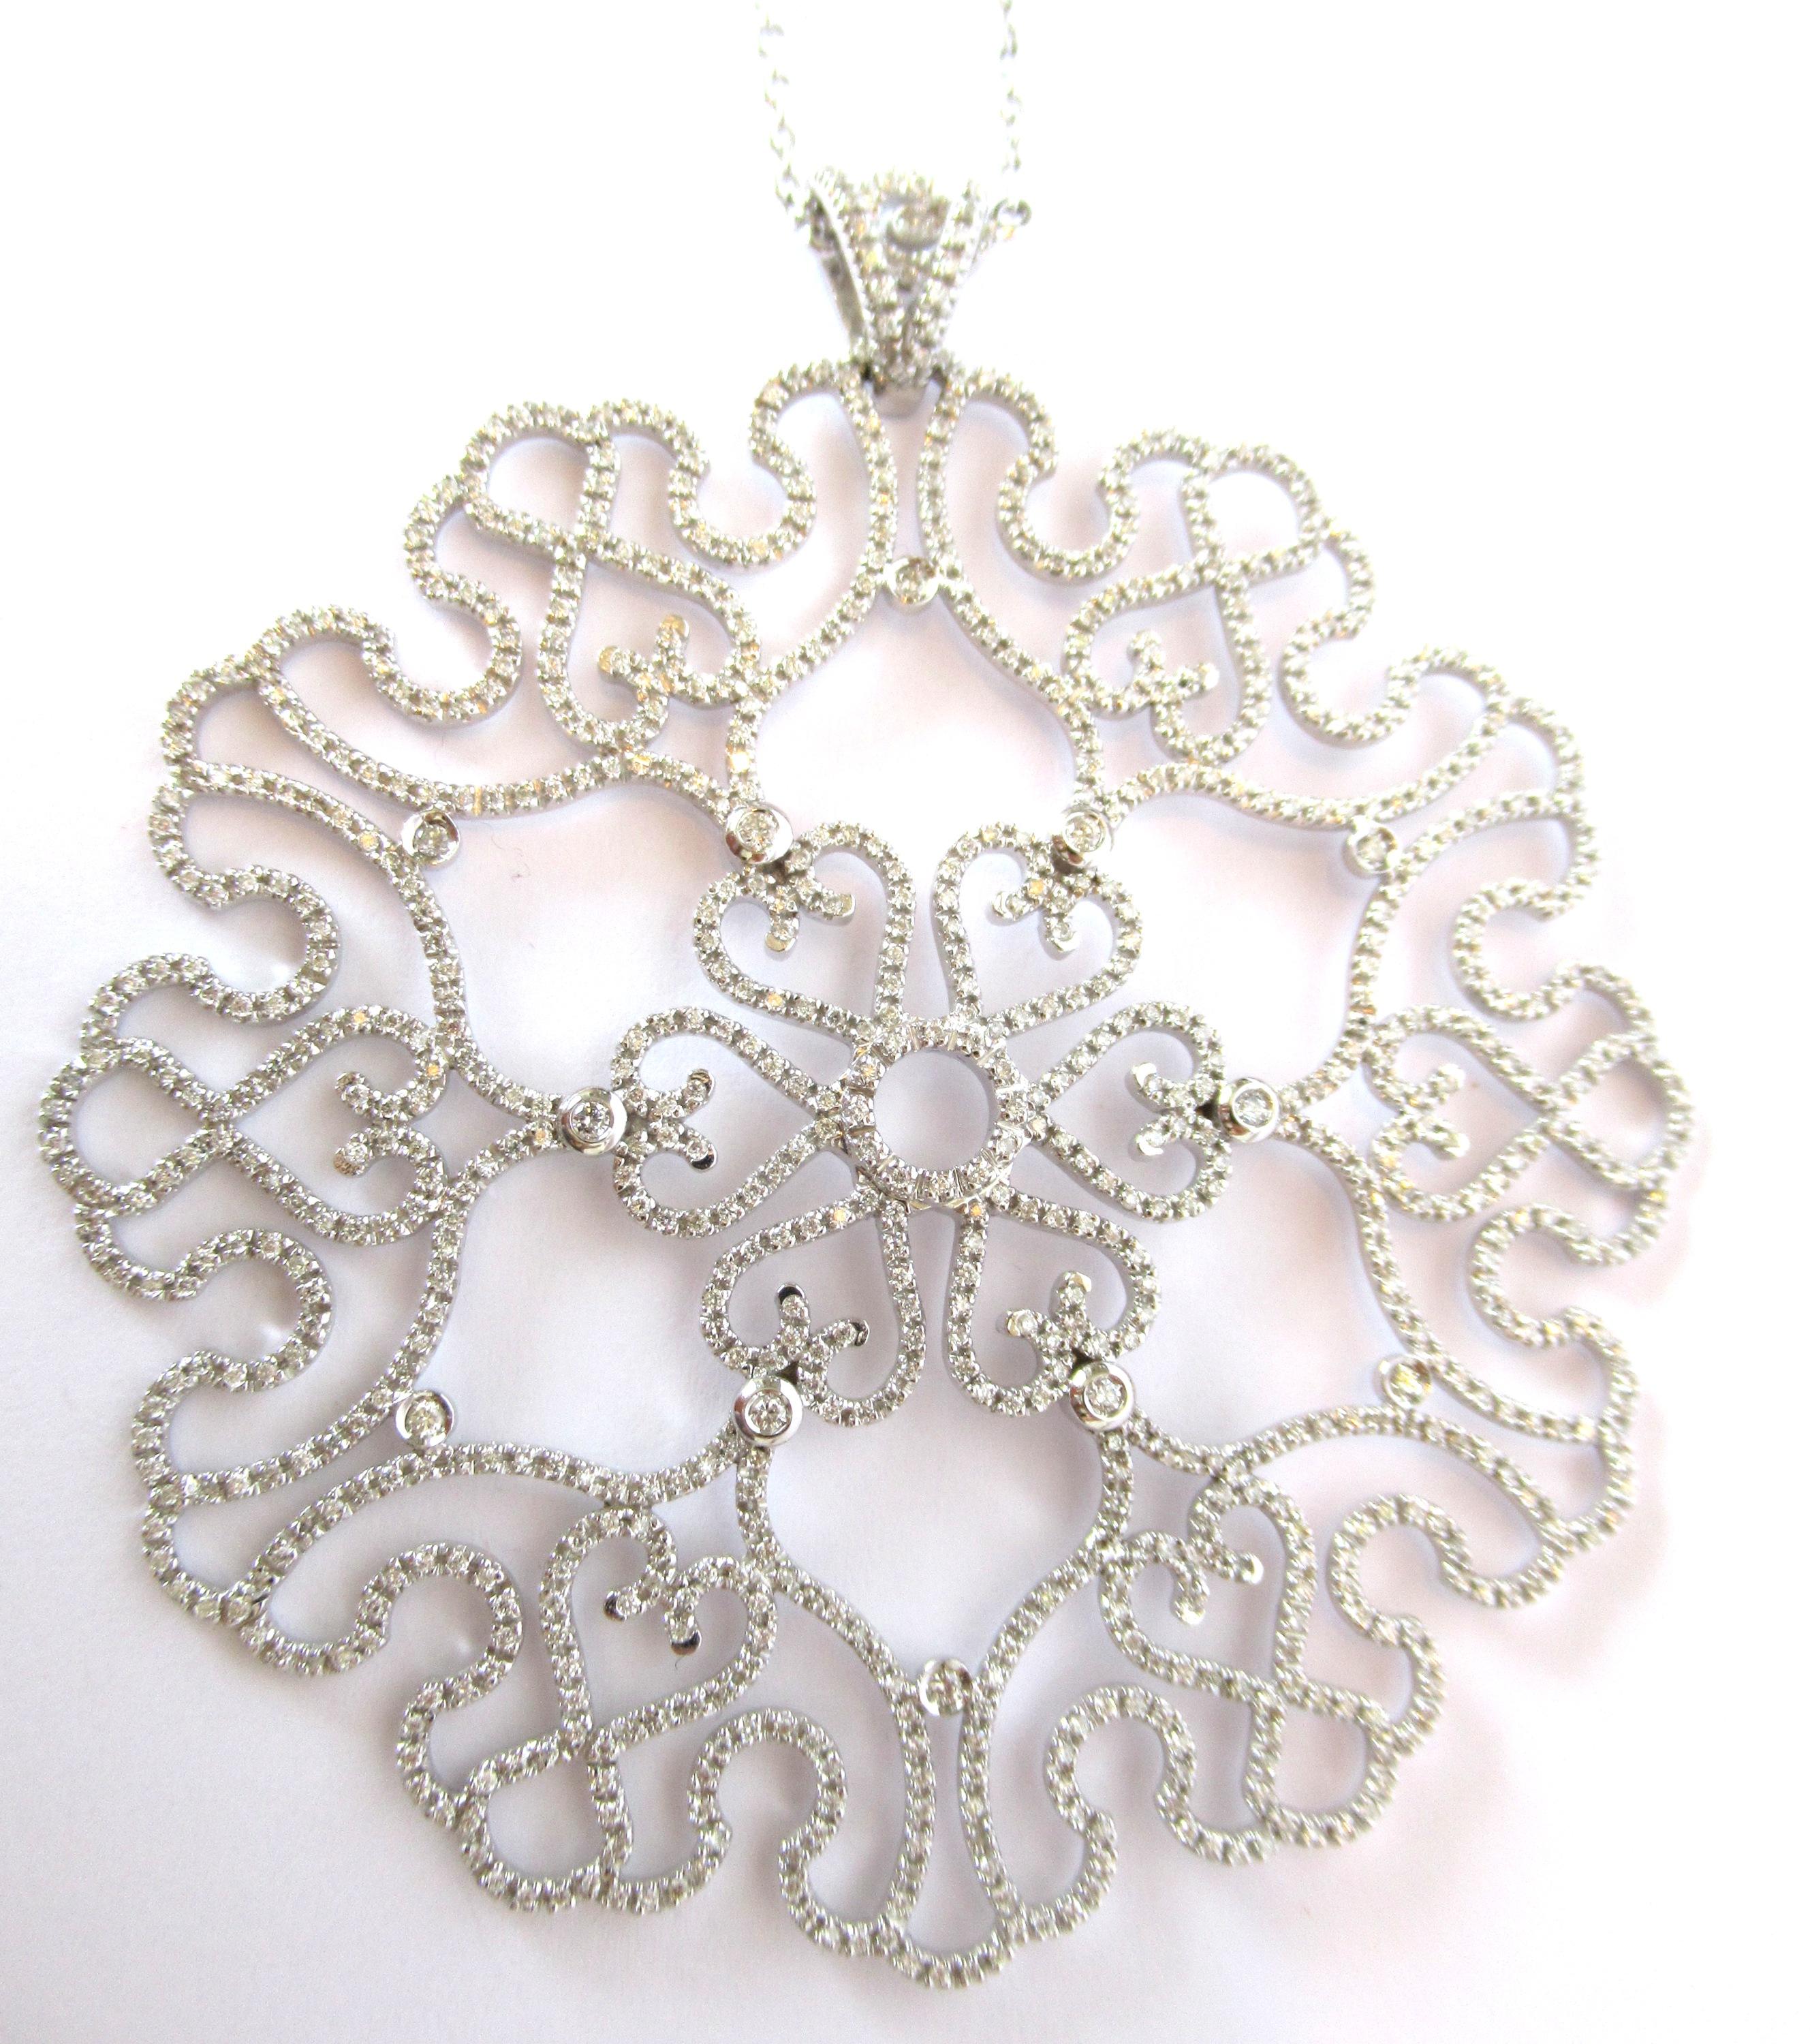 This necklace is inspired by snowflakes. Snowflake symbolizes spotless beauty, pure and noble. A white diamond pendant realized in 18K white gold with white diamonds.
18 K White Gold  23.60 Grams
White Diamonds Brilliant Cut 2.16 Carats
All Our